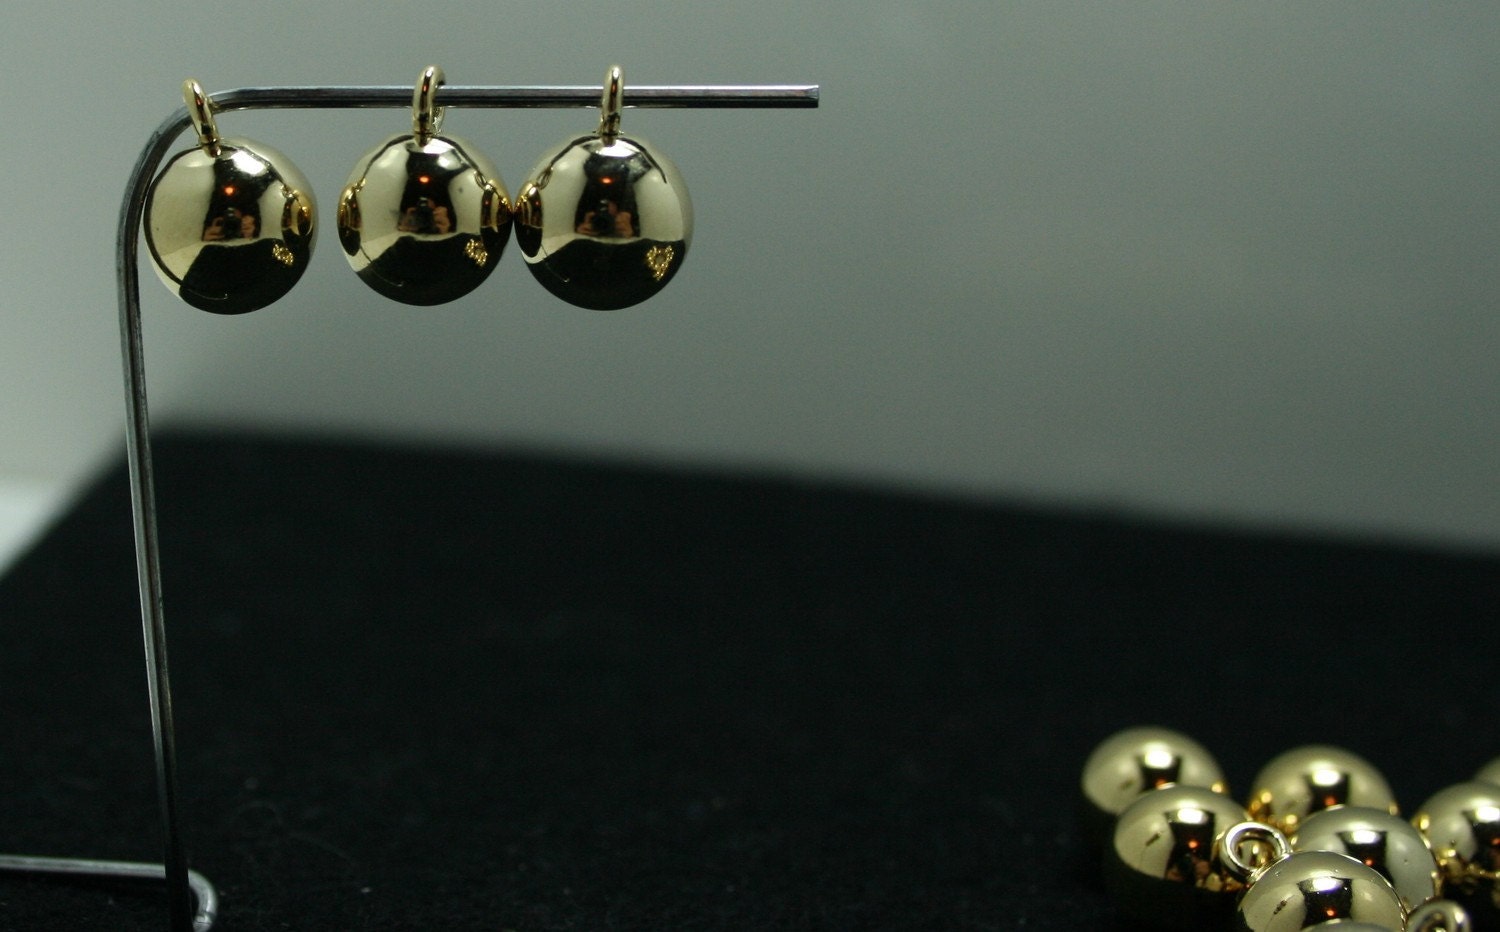 Gold Plated Ball Buttons With Wire Loop Shank 9 Mm Diameter approx